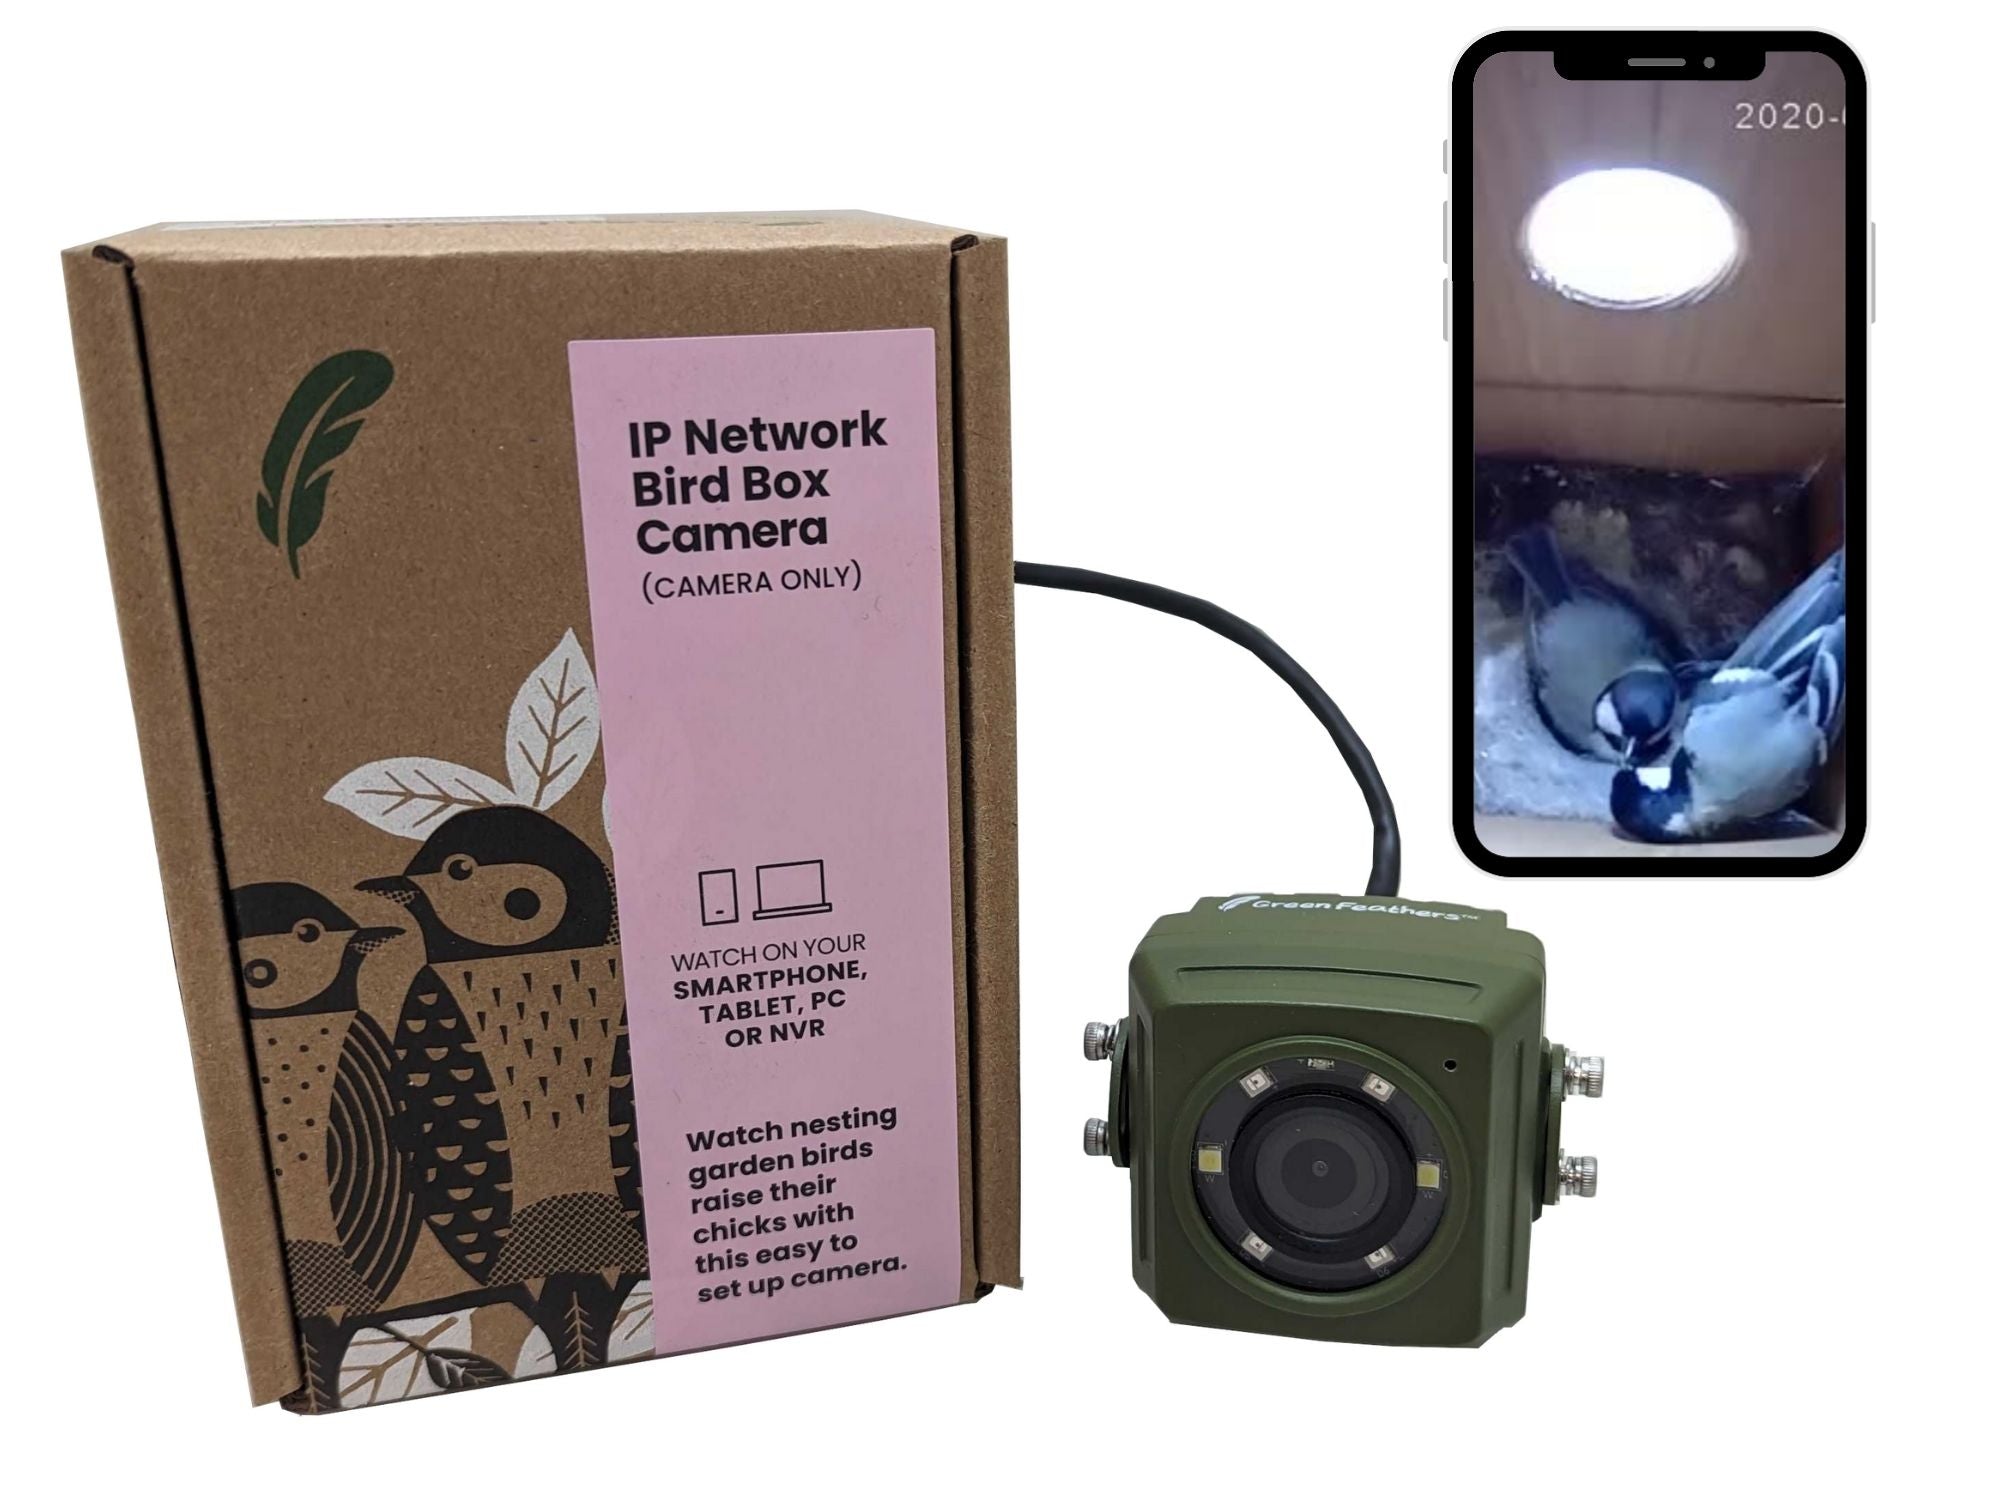 Wired Network Bird Box & Wildlife HD Camera PoE Version (with 20m cable)